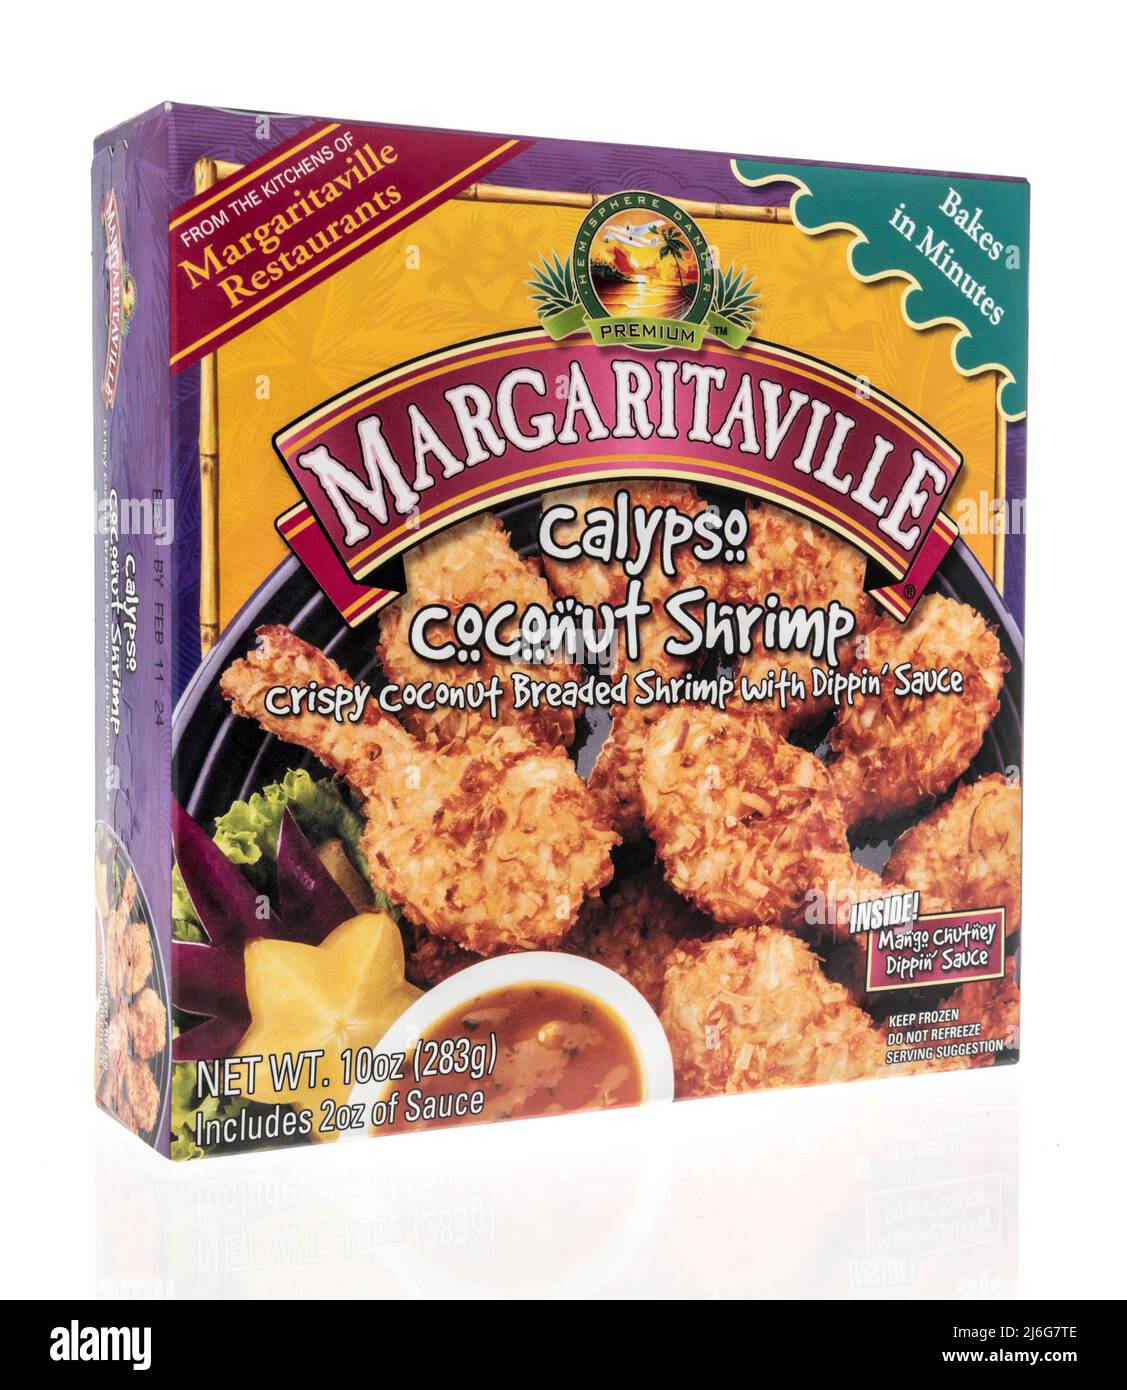 Winneconne, WI -23 April 2022: A package of Margaritaville calypso coconut shrimp on an isolated background Stock Photo